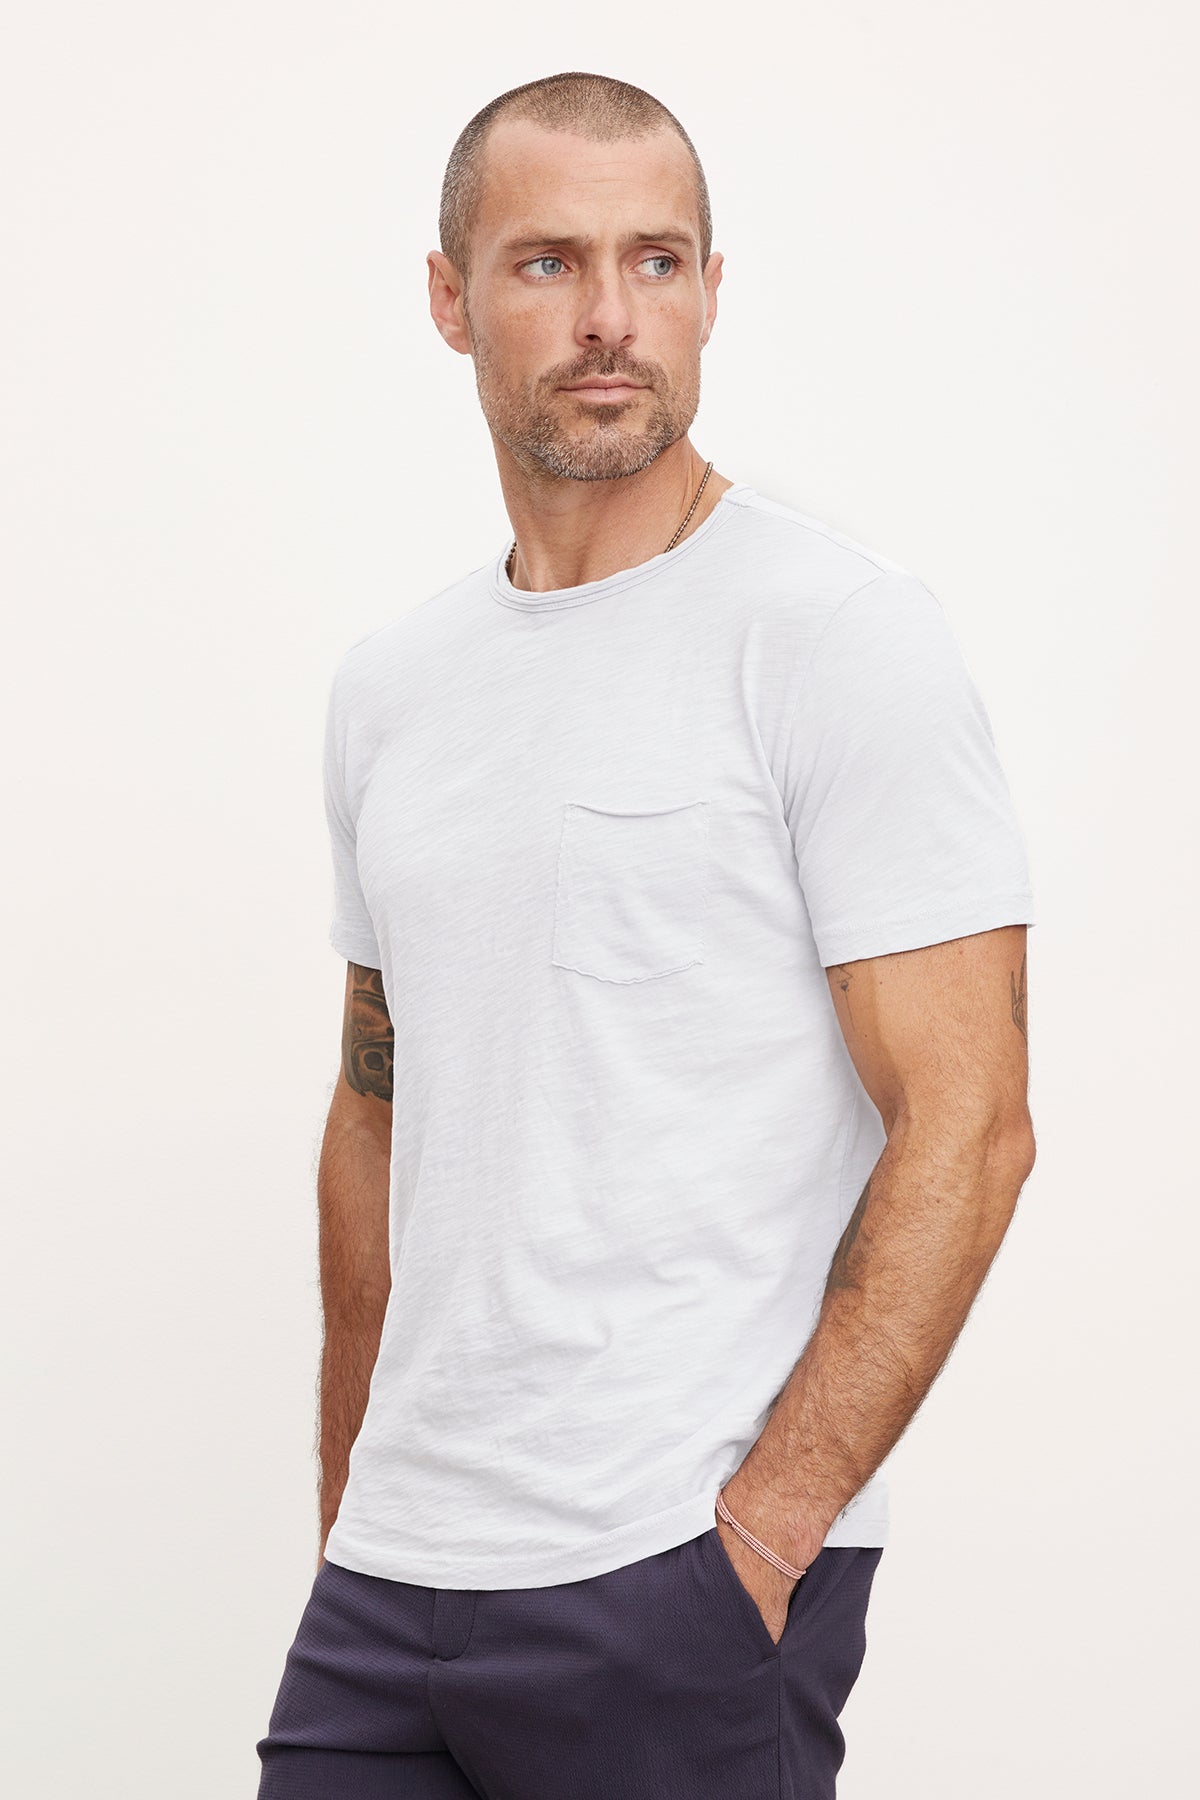 A man with a beard and tattoos, wearing a white textured cotton slub CHAD TEE by Velvet by Graham & Spencer and navy trousers, stands with a serious expression looking to his left.-36909348782273